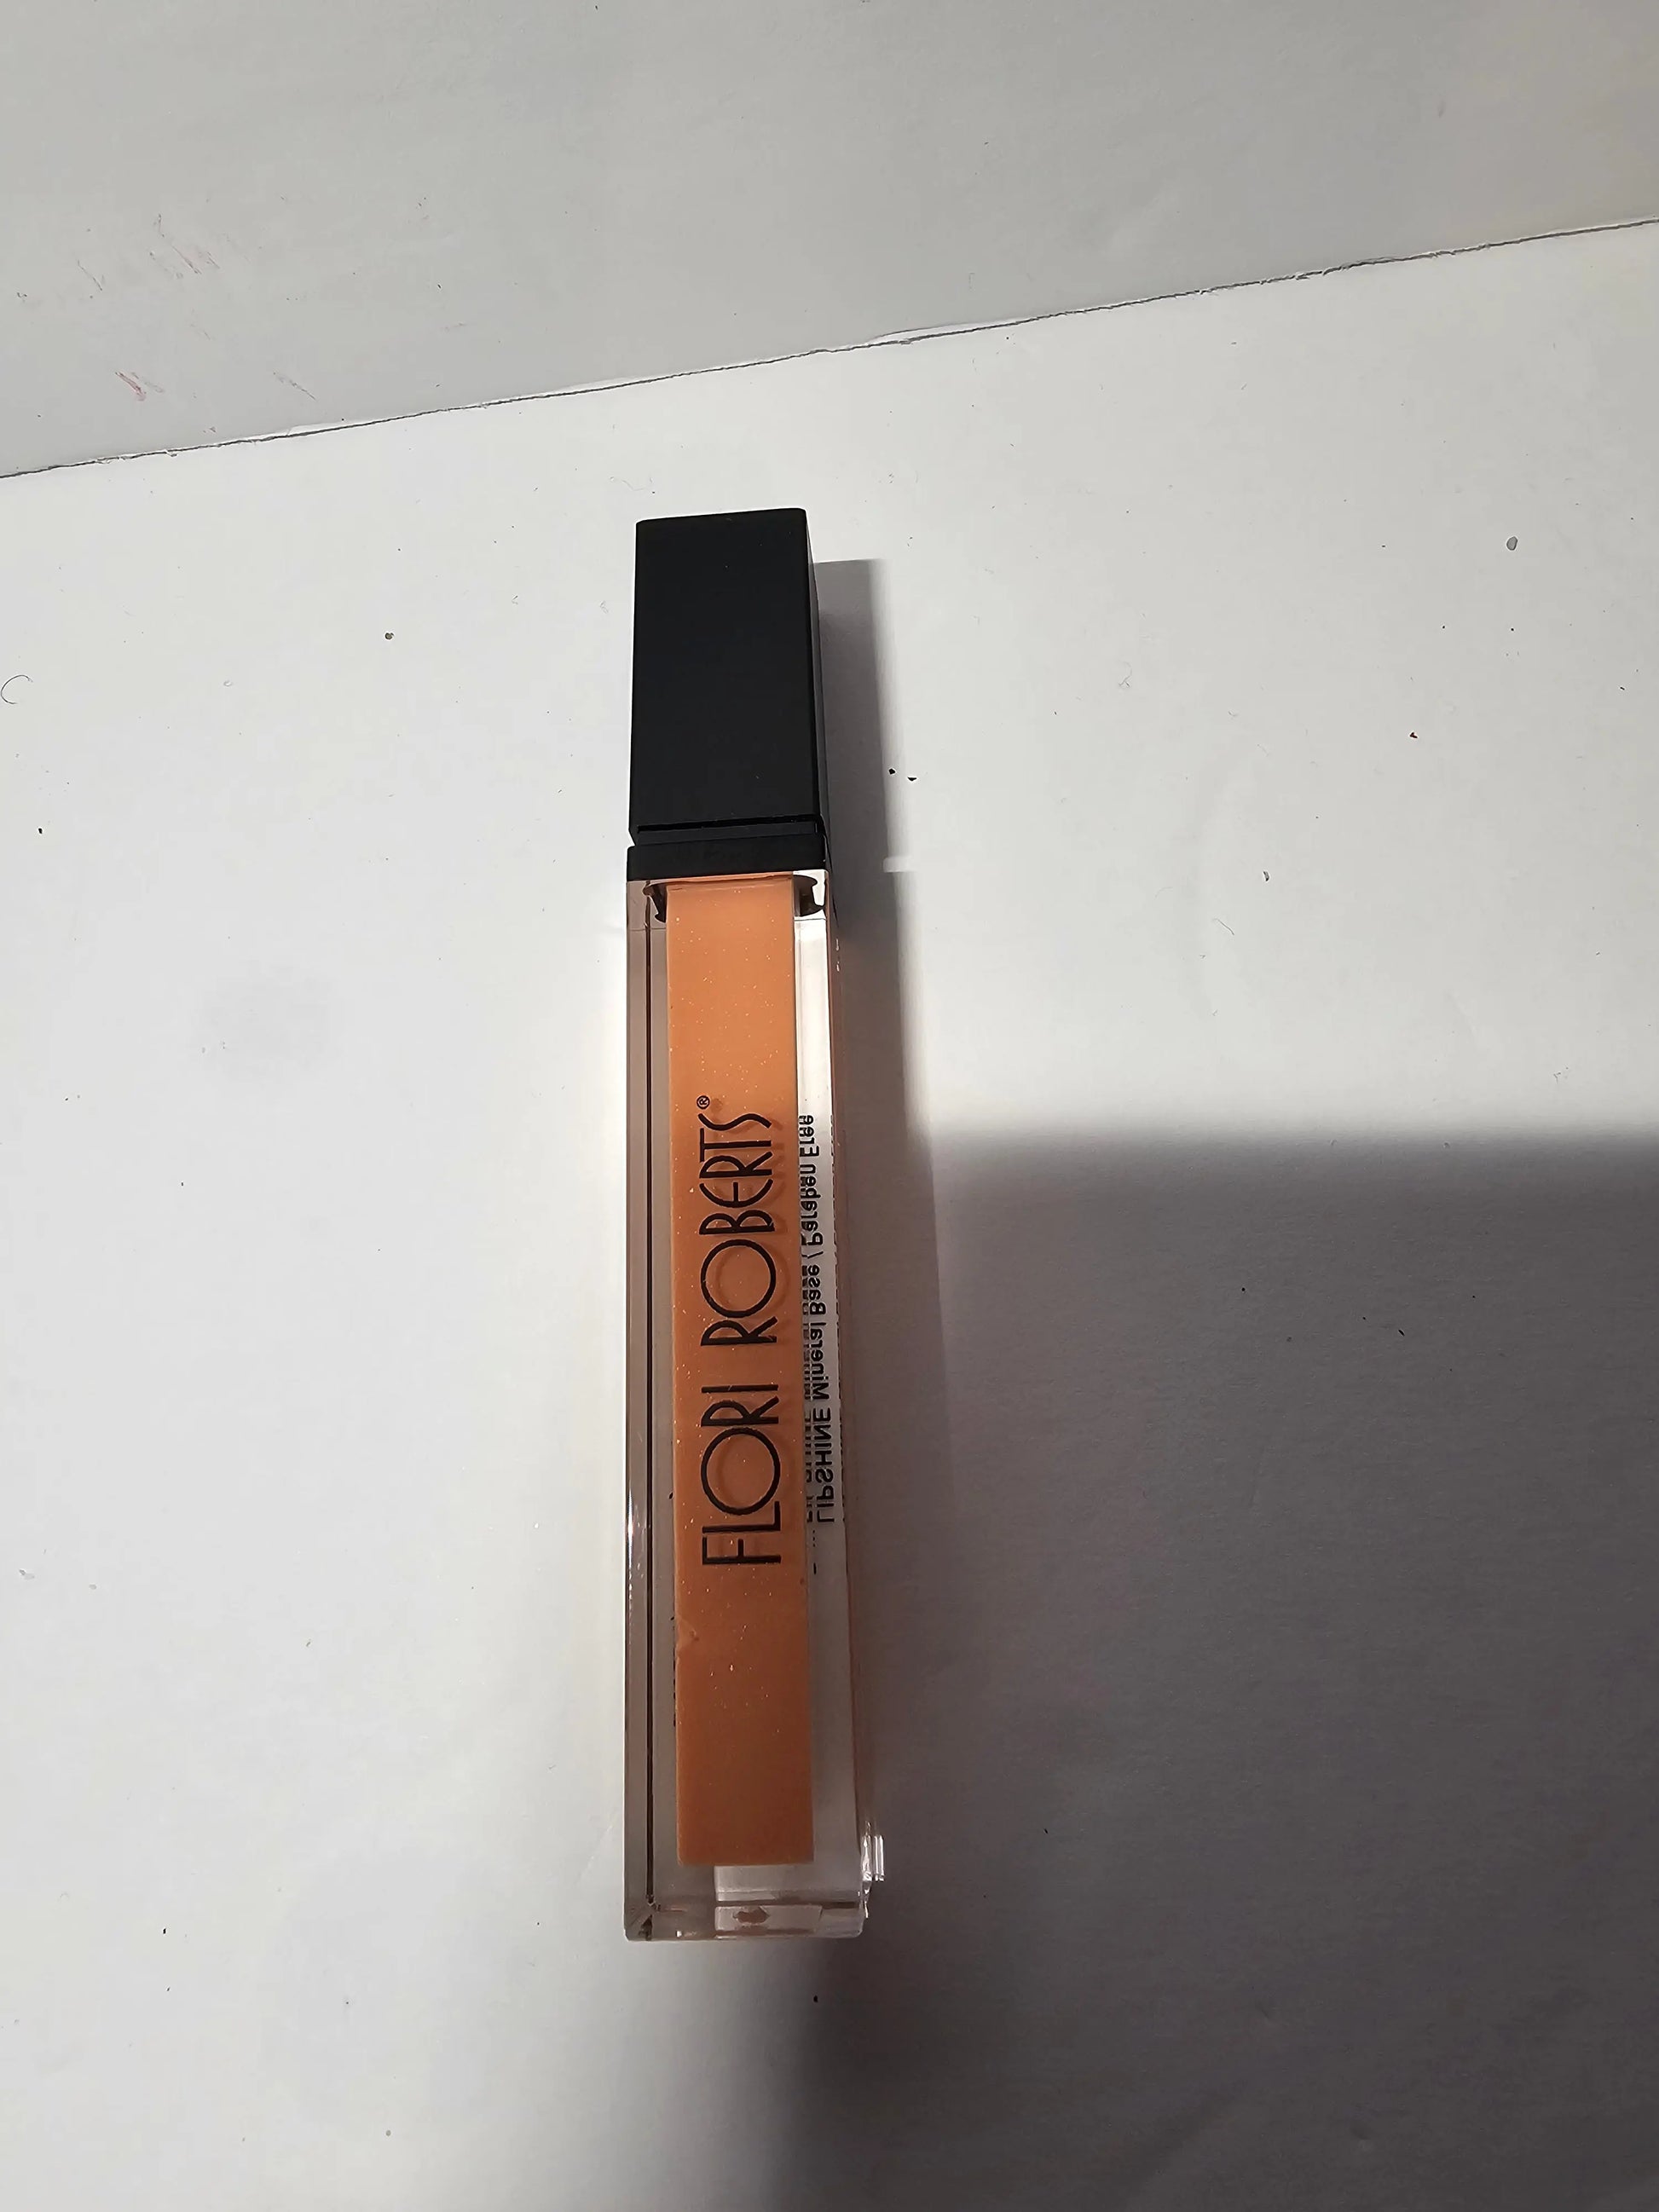 Flori Roberts Mineral Based Lip Shine Cathy,s new look fashion &beauty